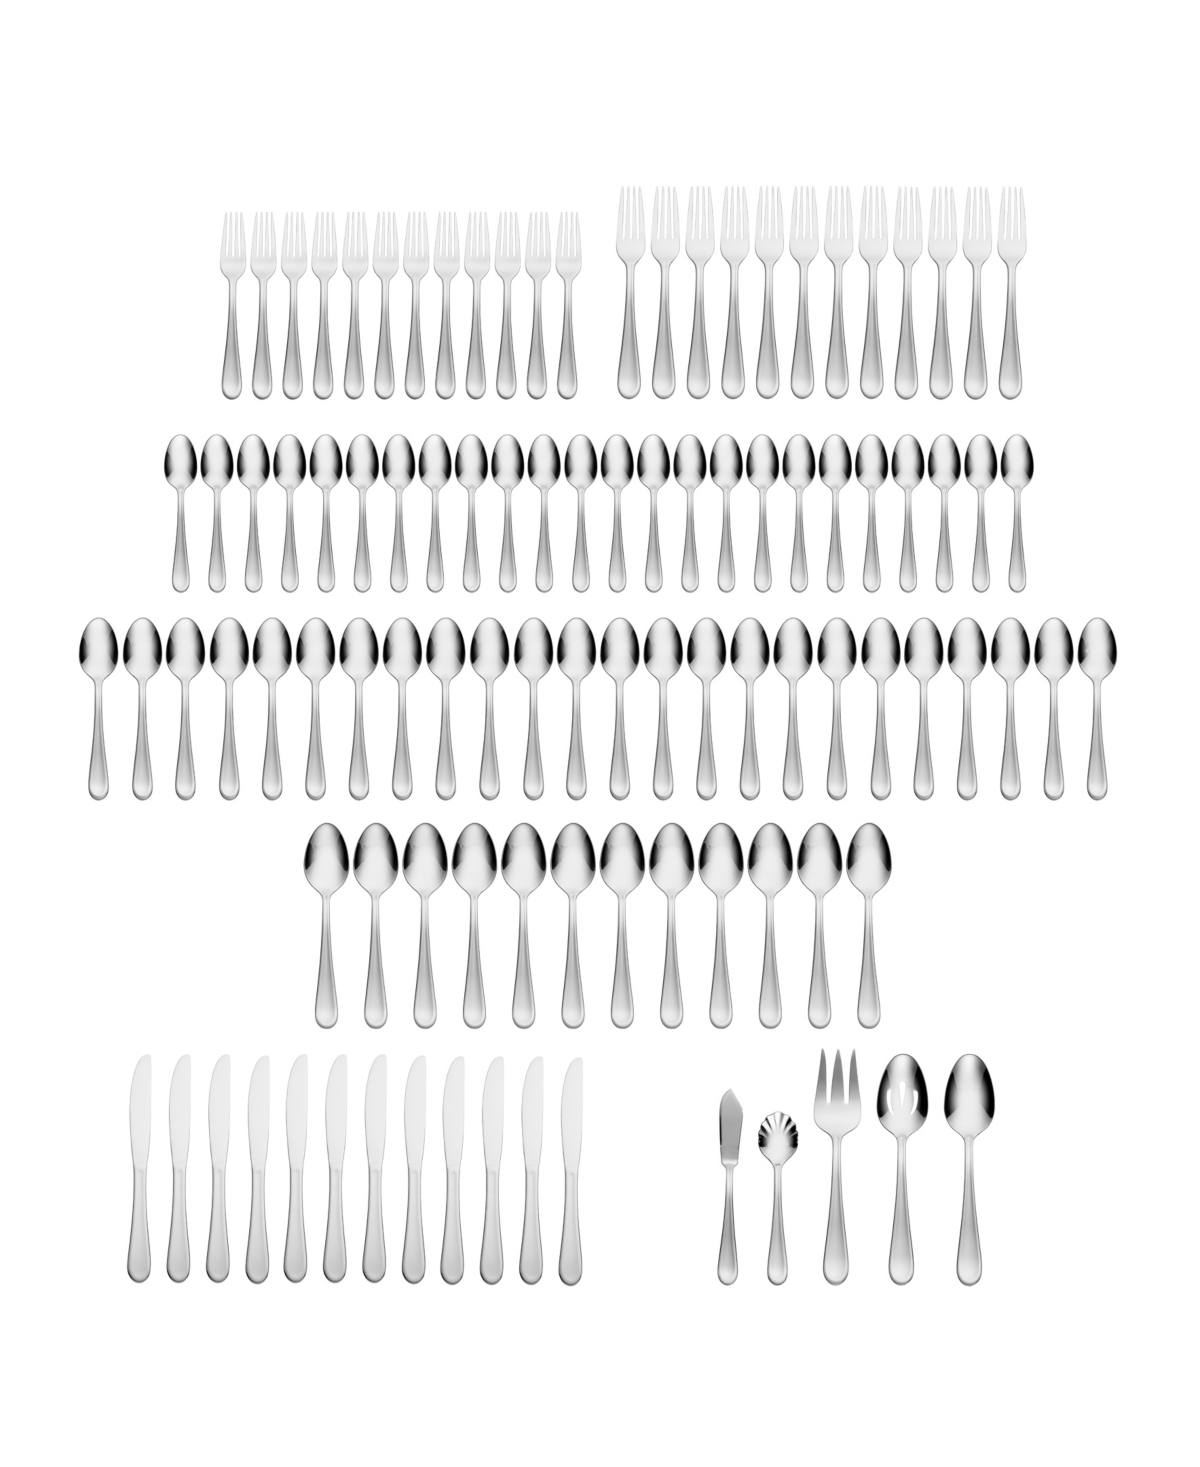 Hampton Forge Nova 101 Piece Remailer, Service For 12 In Metallic And Stainless